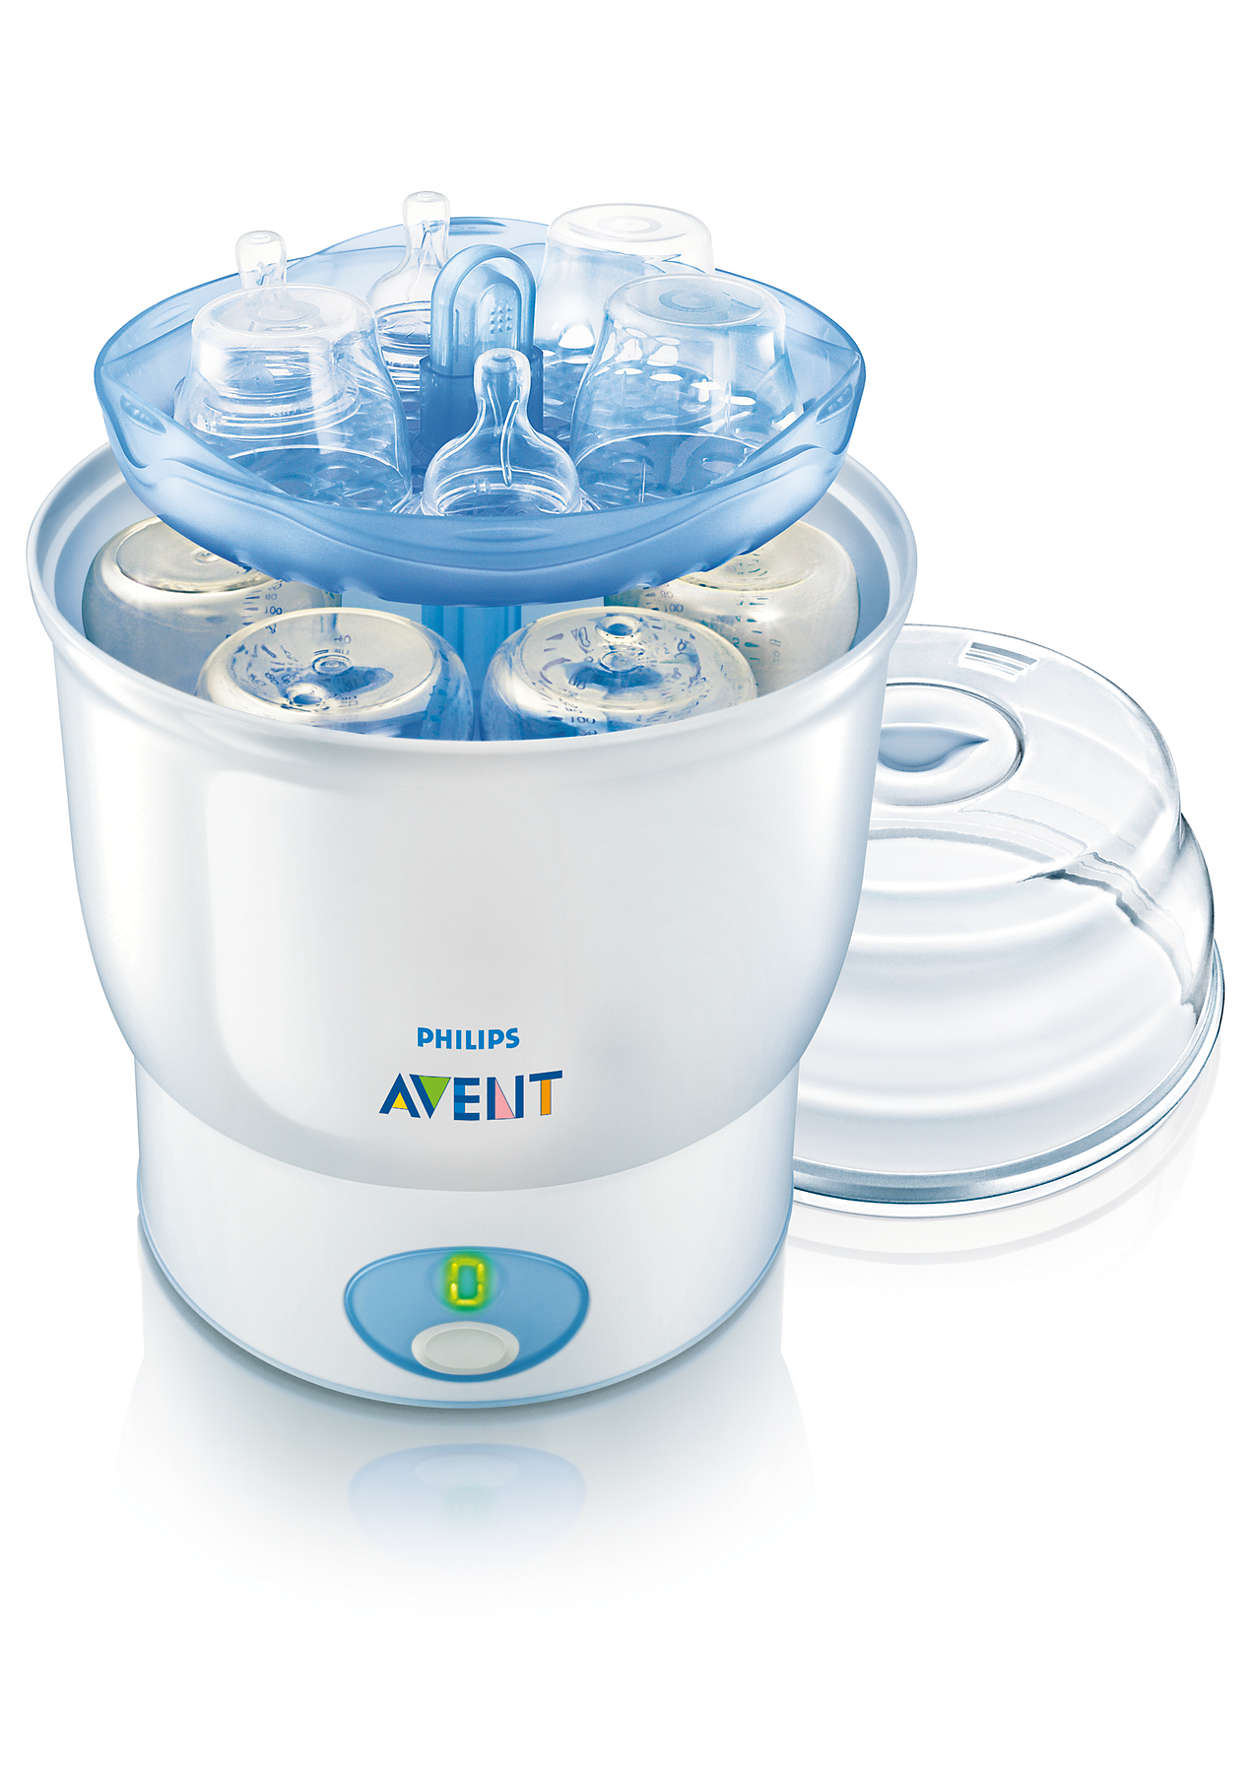 What to Look For When Buying Bottle Sterilizers?